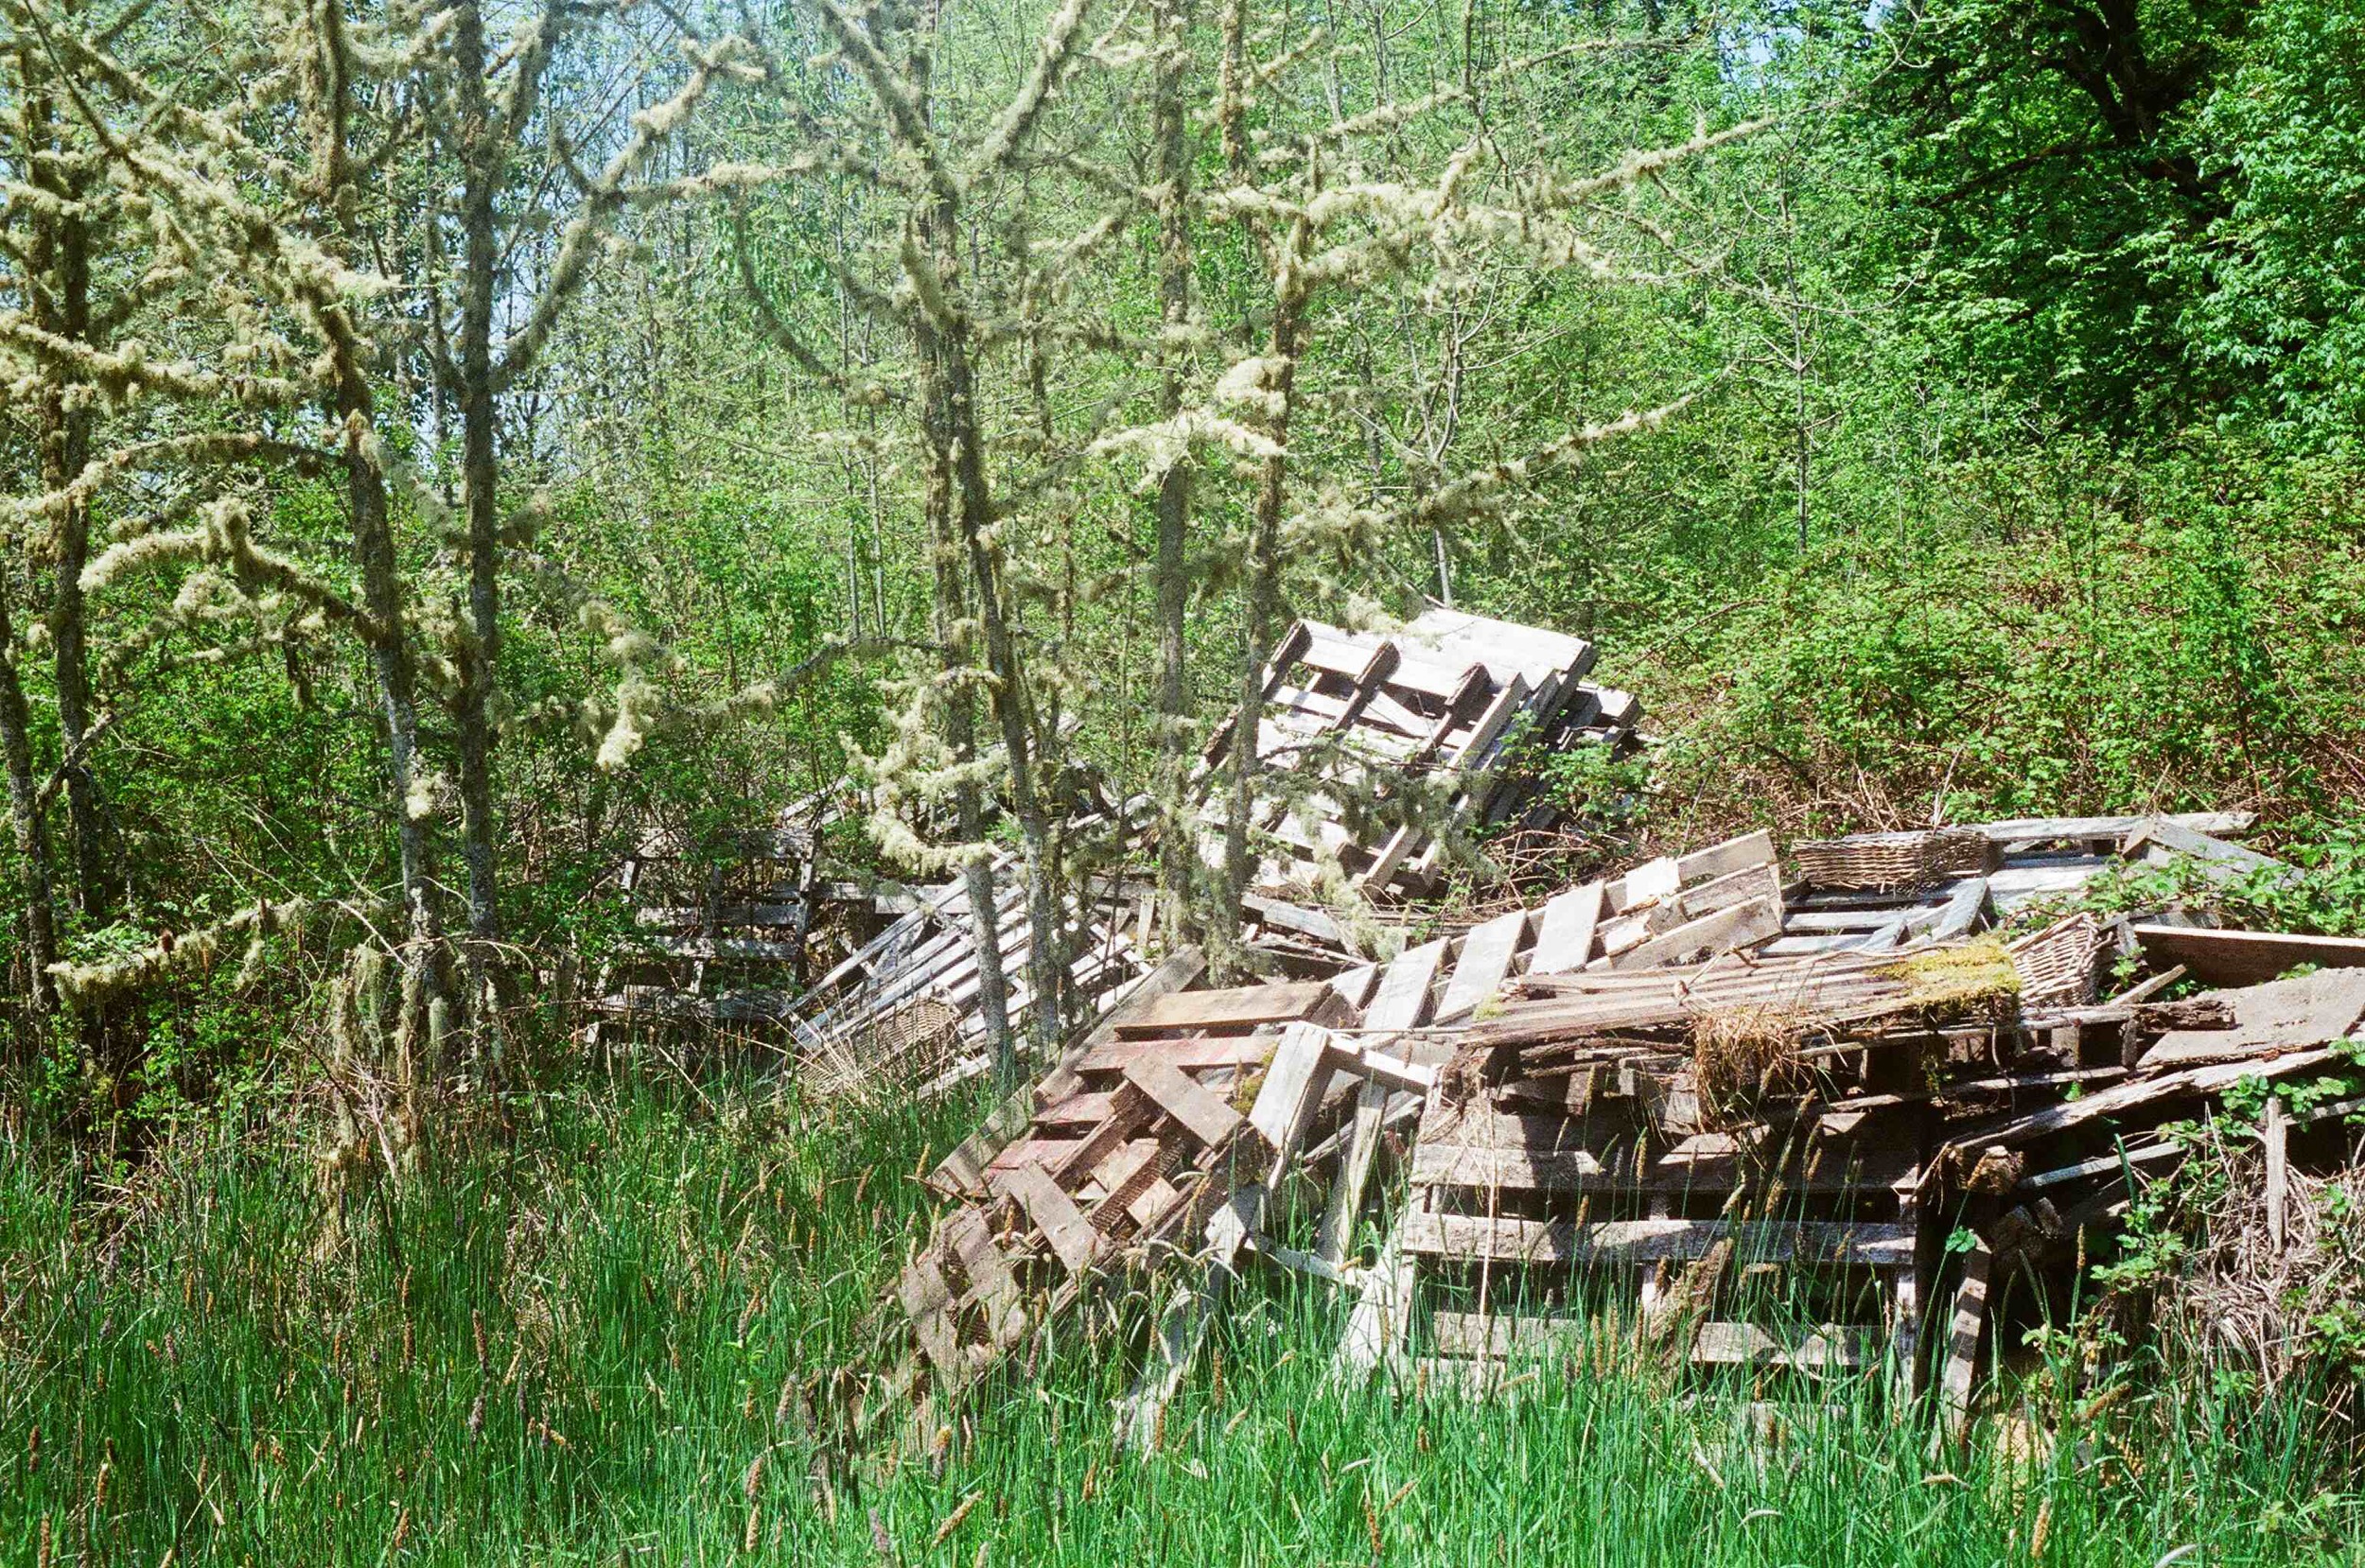  Old pallets and wood scraps accumulate and rot into the soil rather than being burned. 